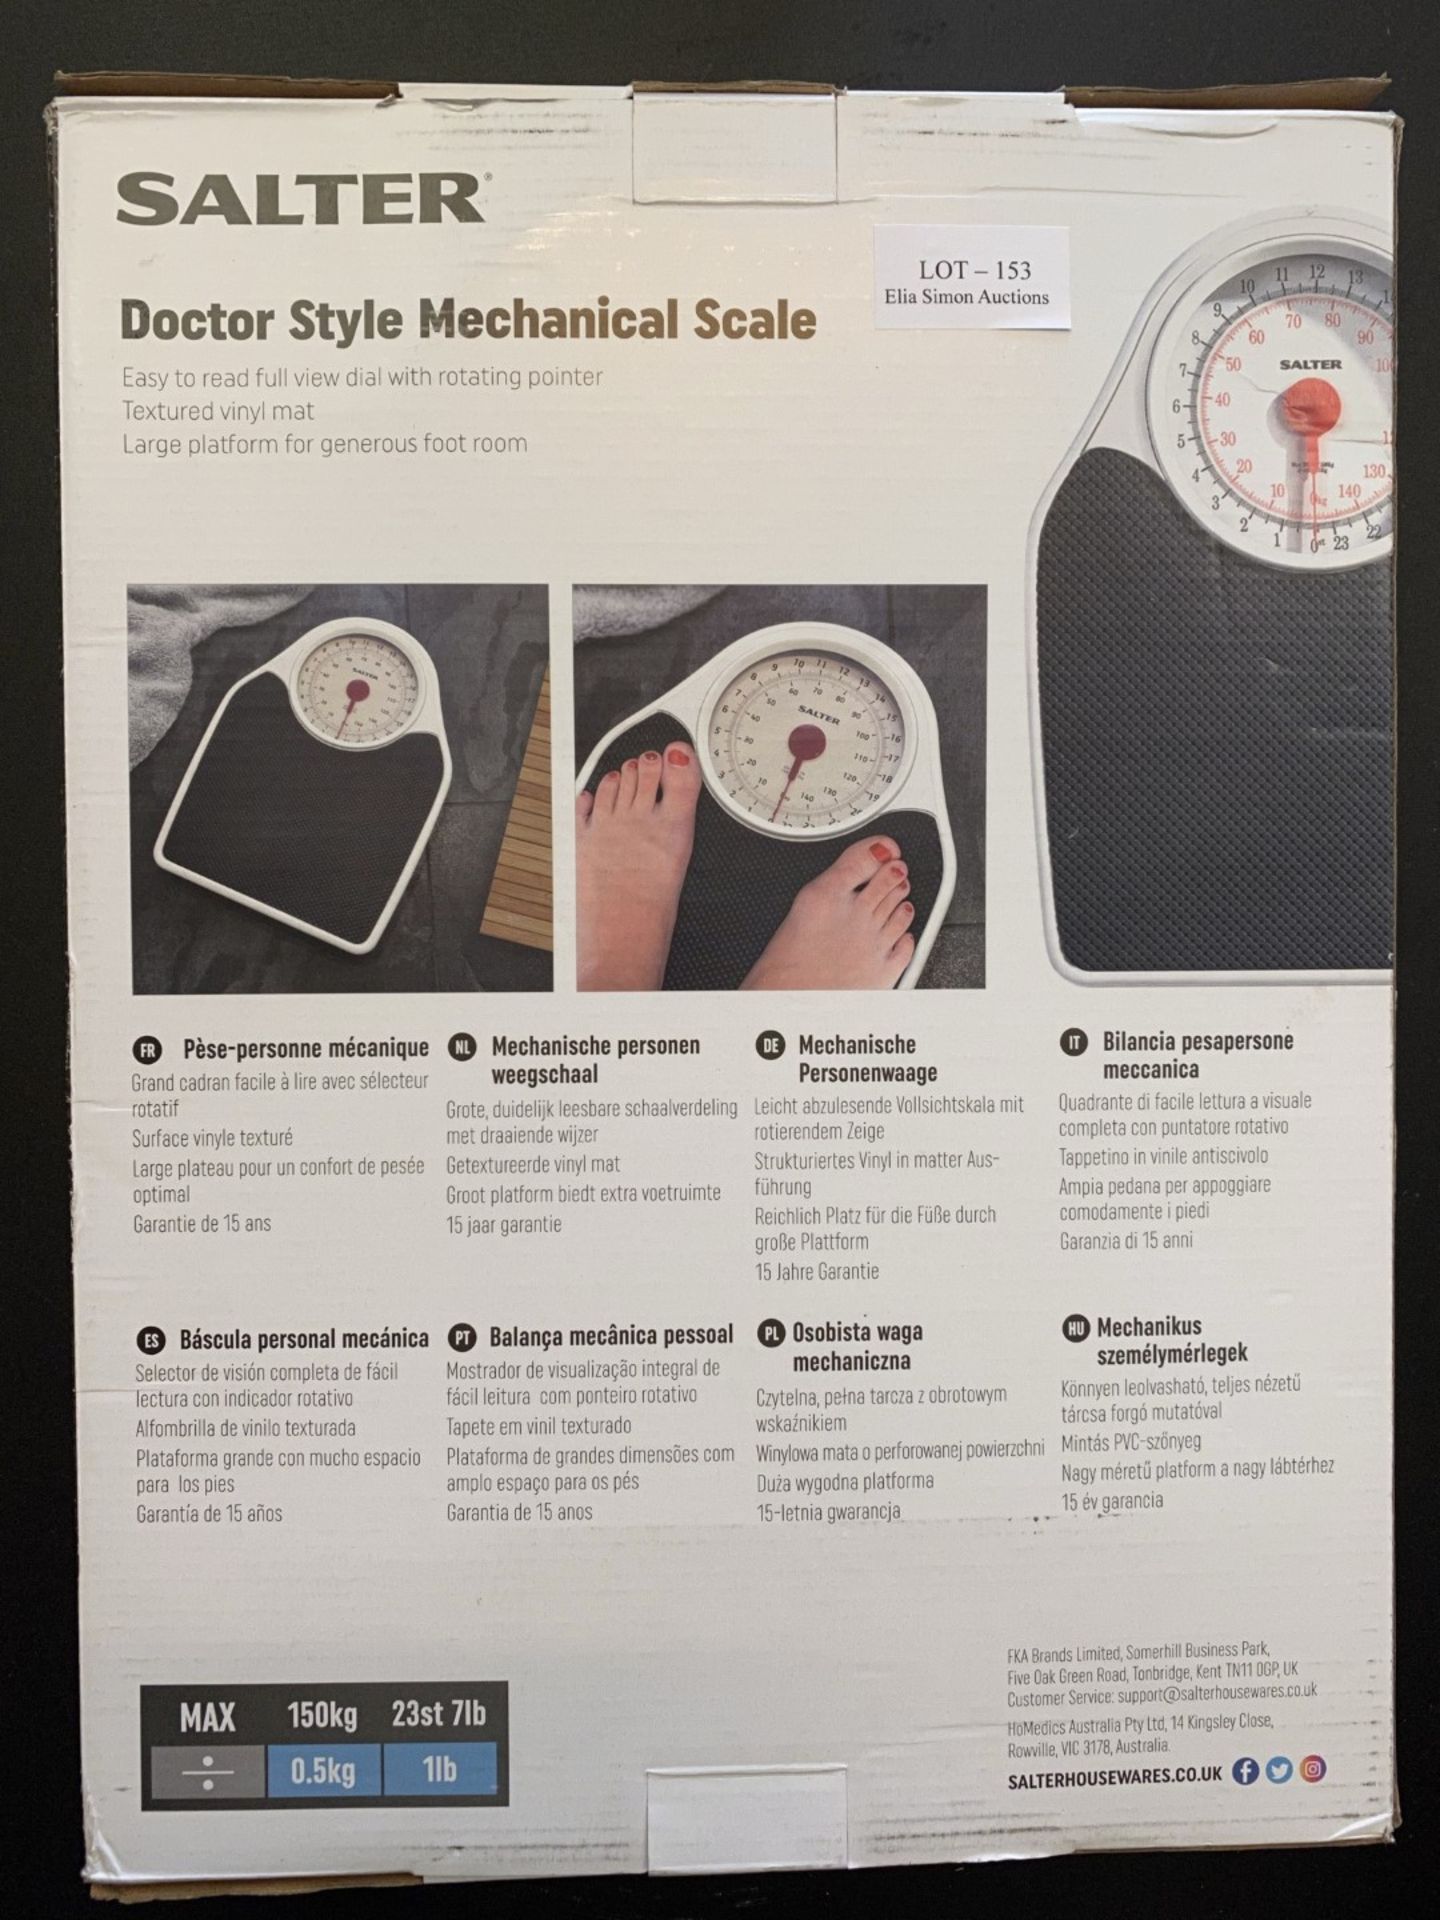 RRP £25 Salter Doctor Style Mechanical Bathroom Scales – Retro White + Black Accurate Weighing - Image 2 of 2